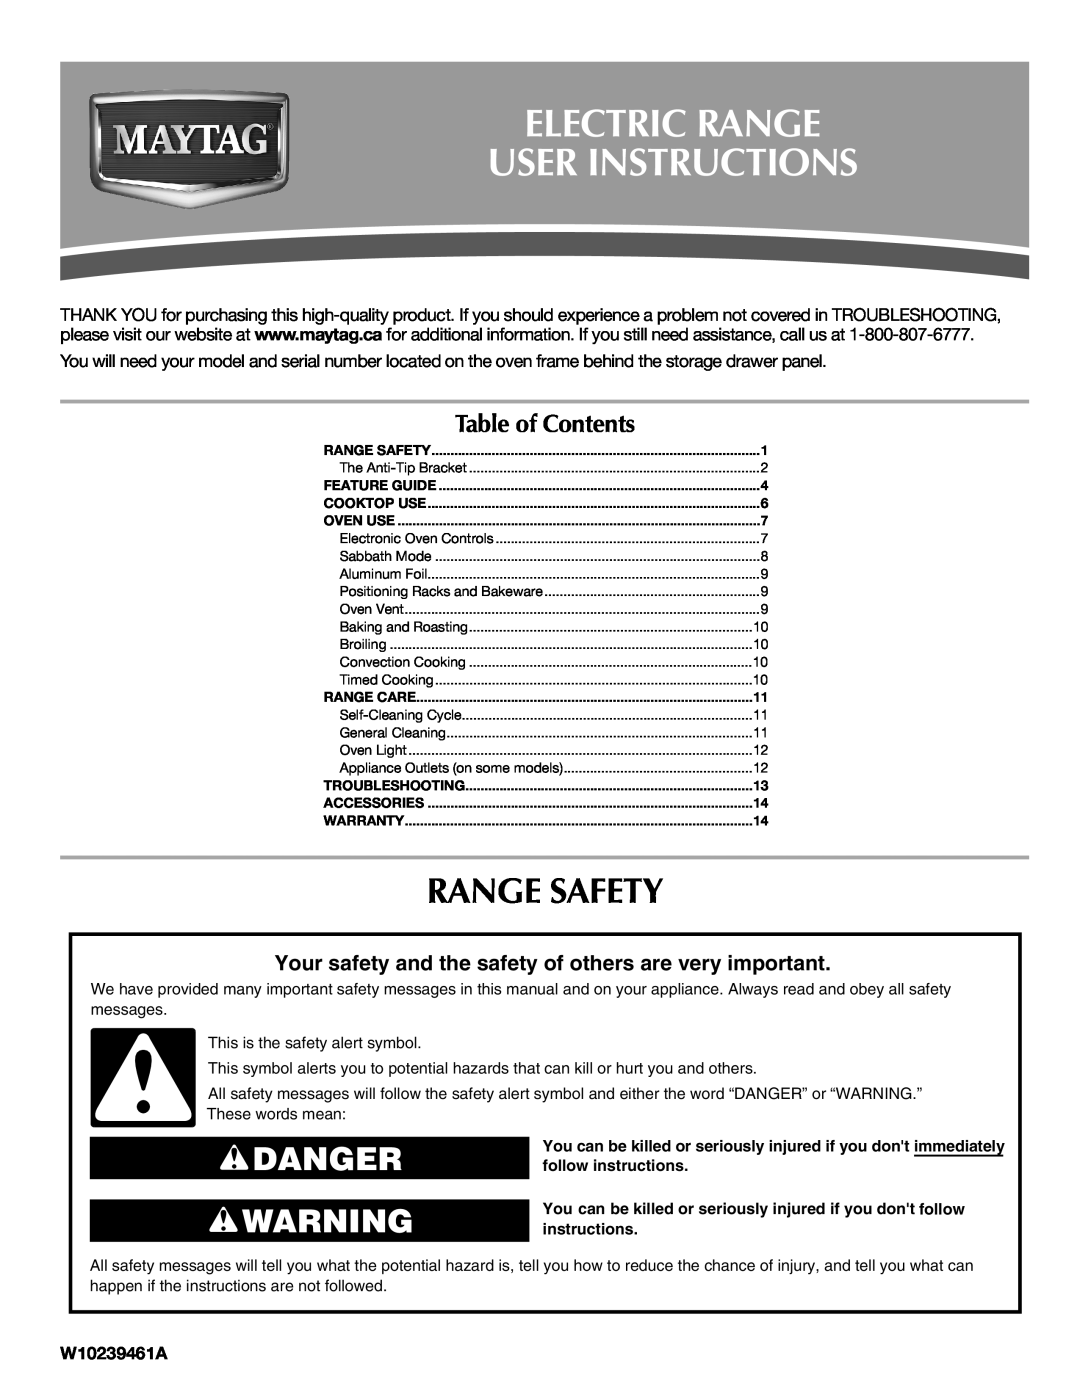 Maytag W10239461A warranty Electric Range User Instructions, Range Safety, Danger, Table of Contents 